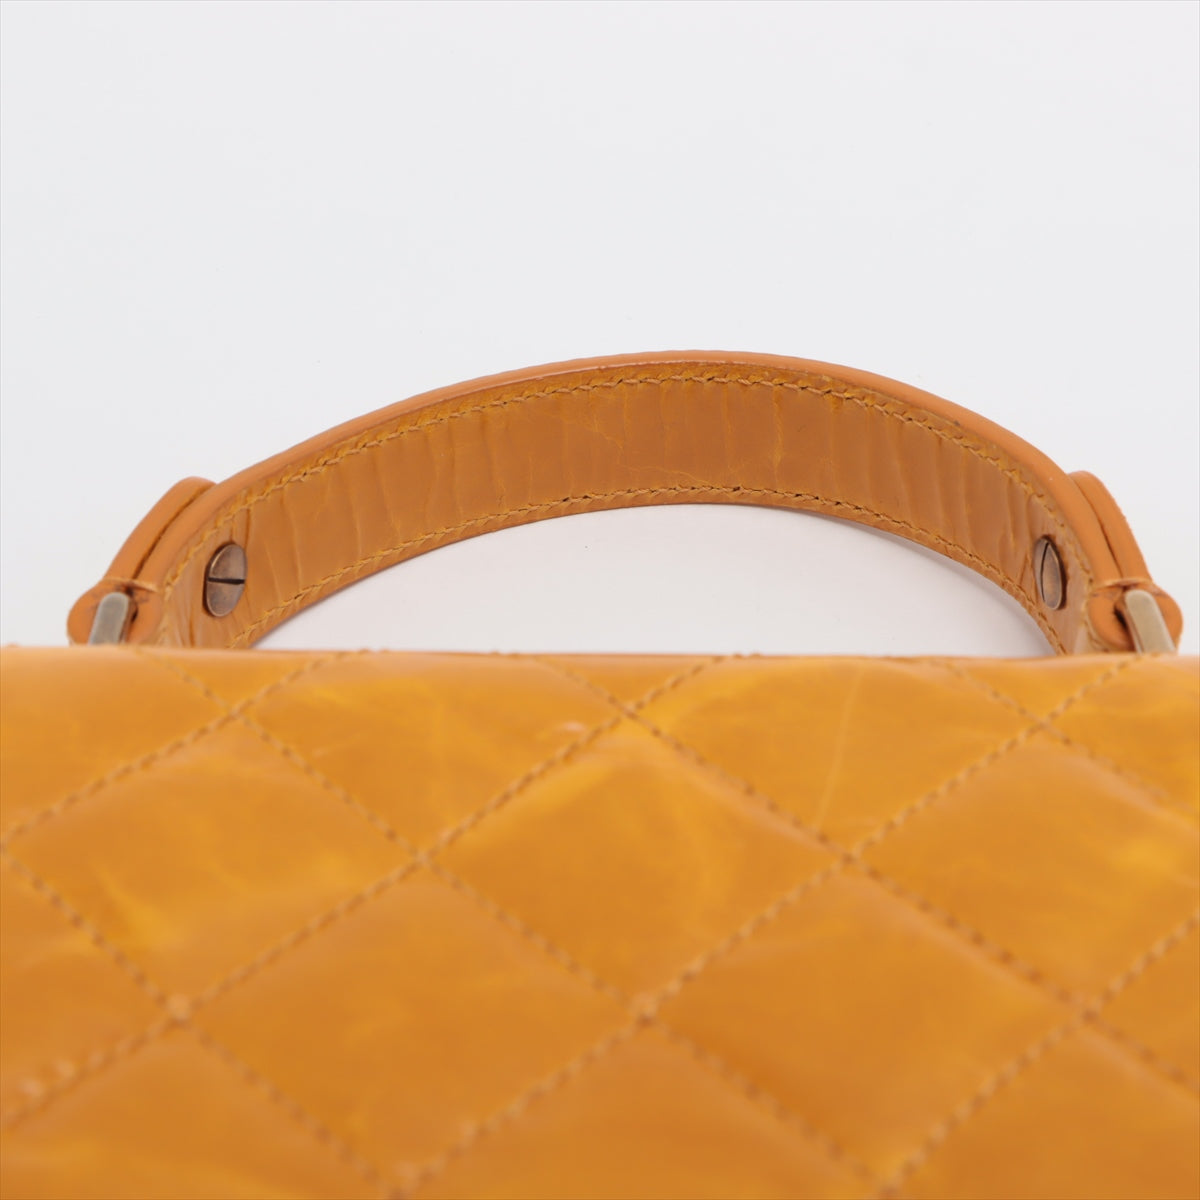 Chanel Matrasse Leather Chain Shoulder Bag 2.55 Yellow G  15th